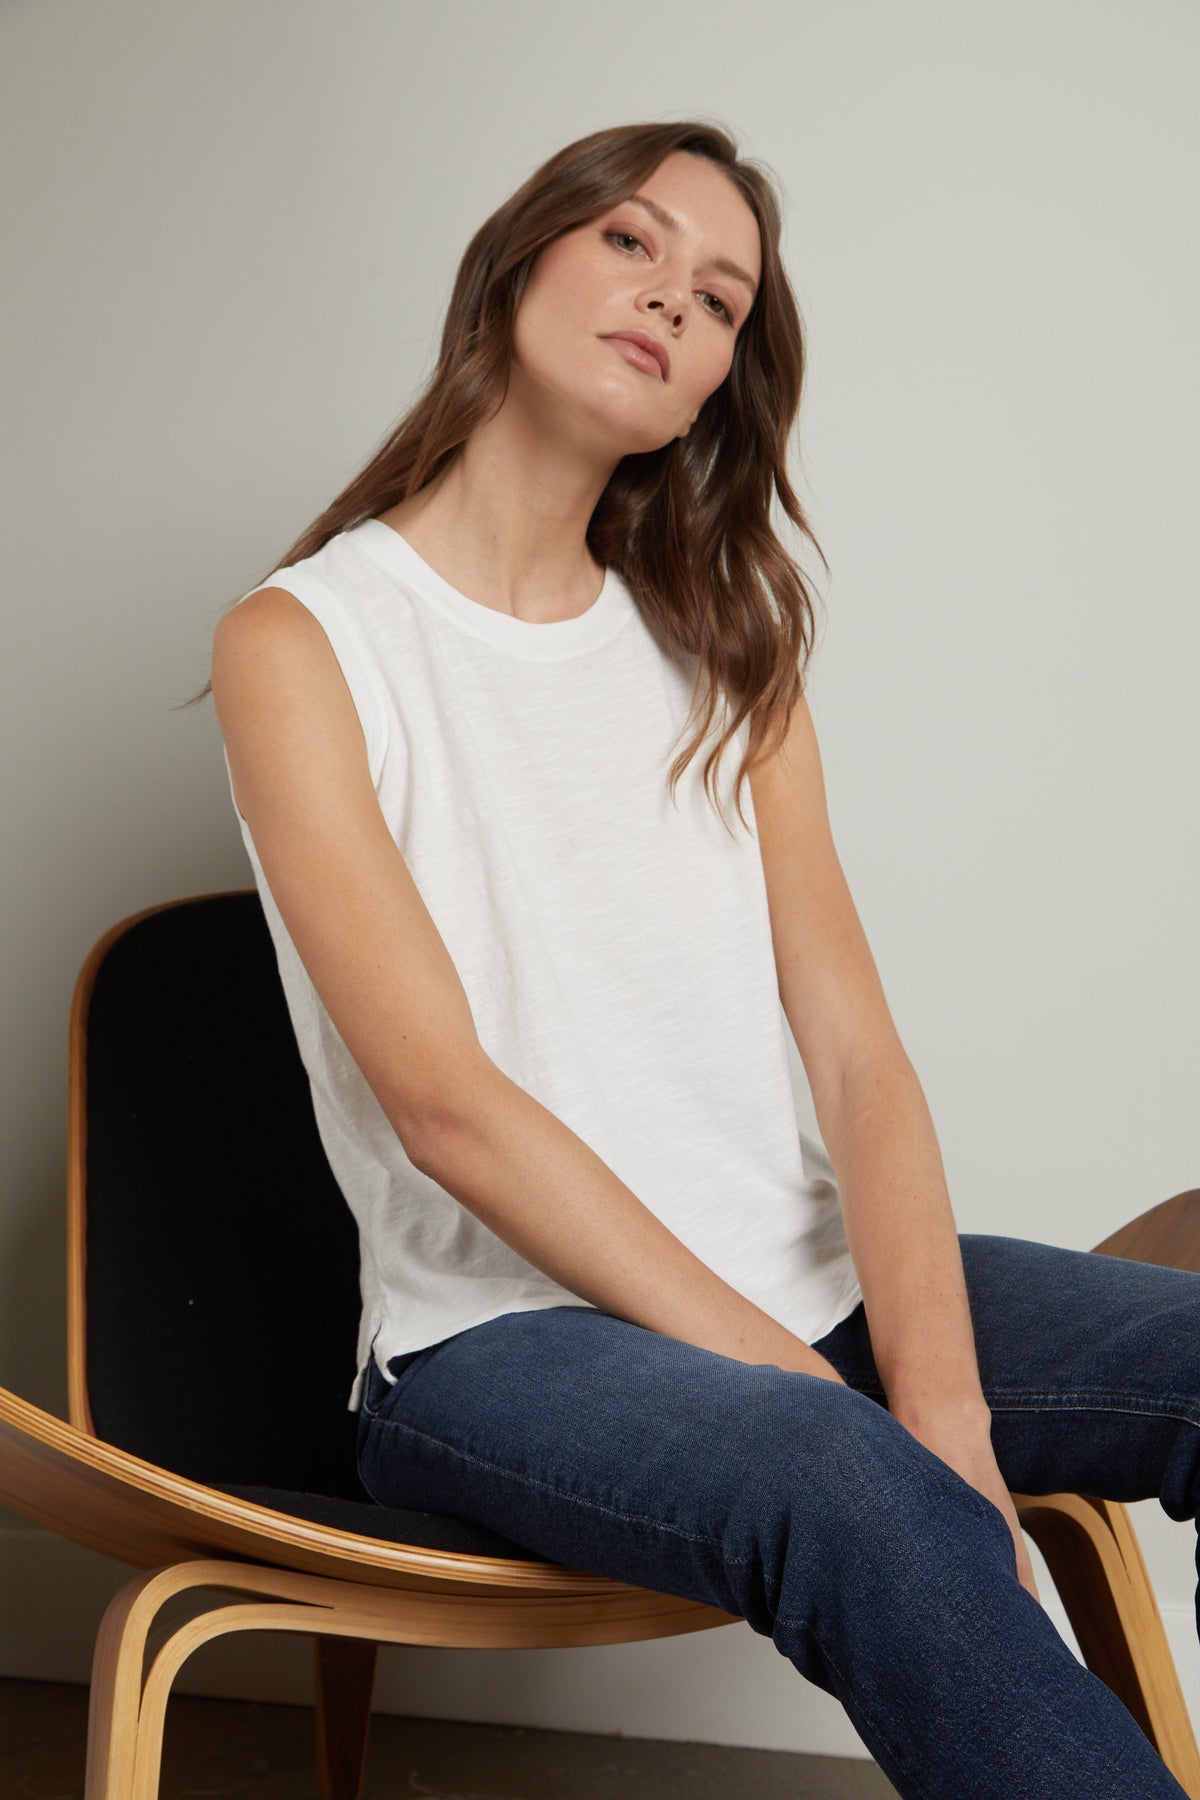   A woman is sitting on a wooden chair wearing jeans and an ELLEN VINTAGE SLUB TANK TOP by Velvet by Graham & Spencer. 